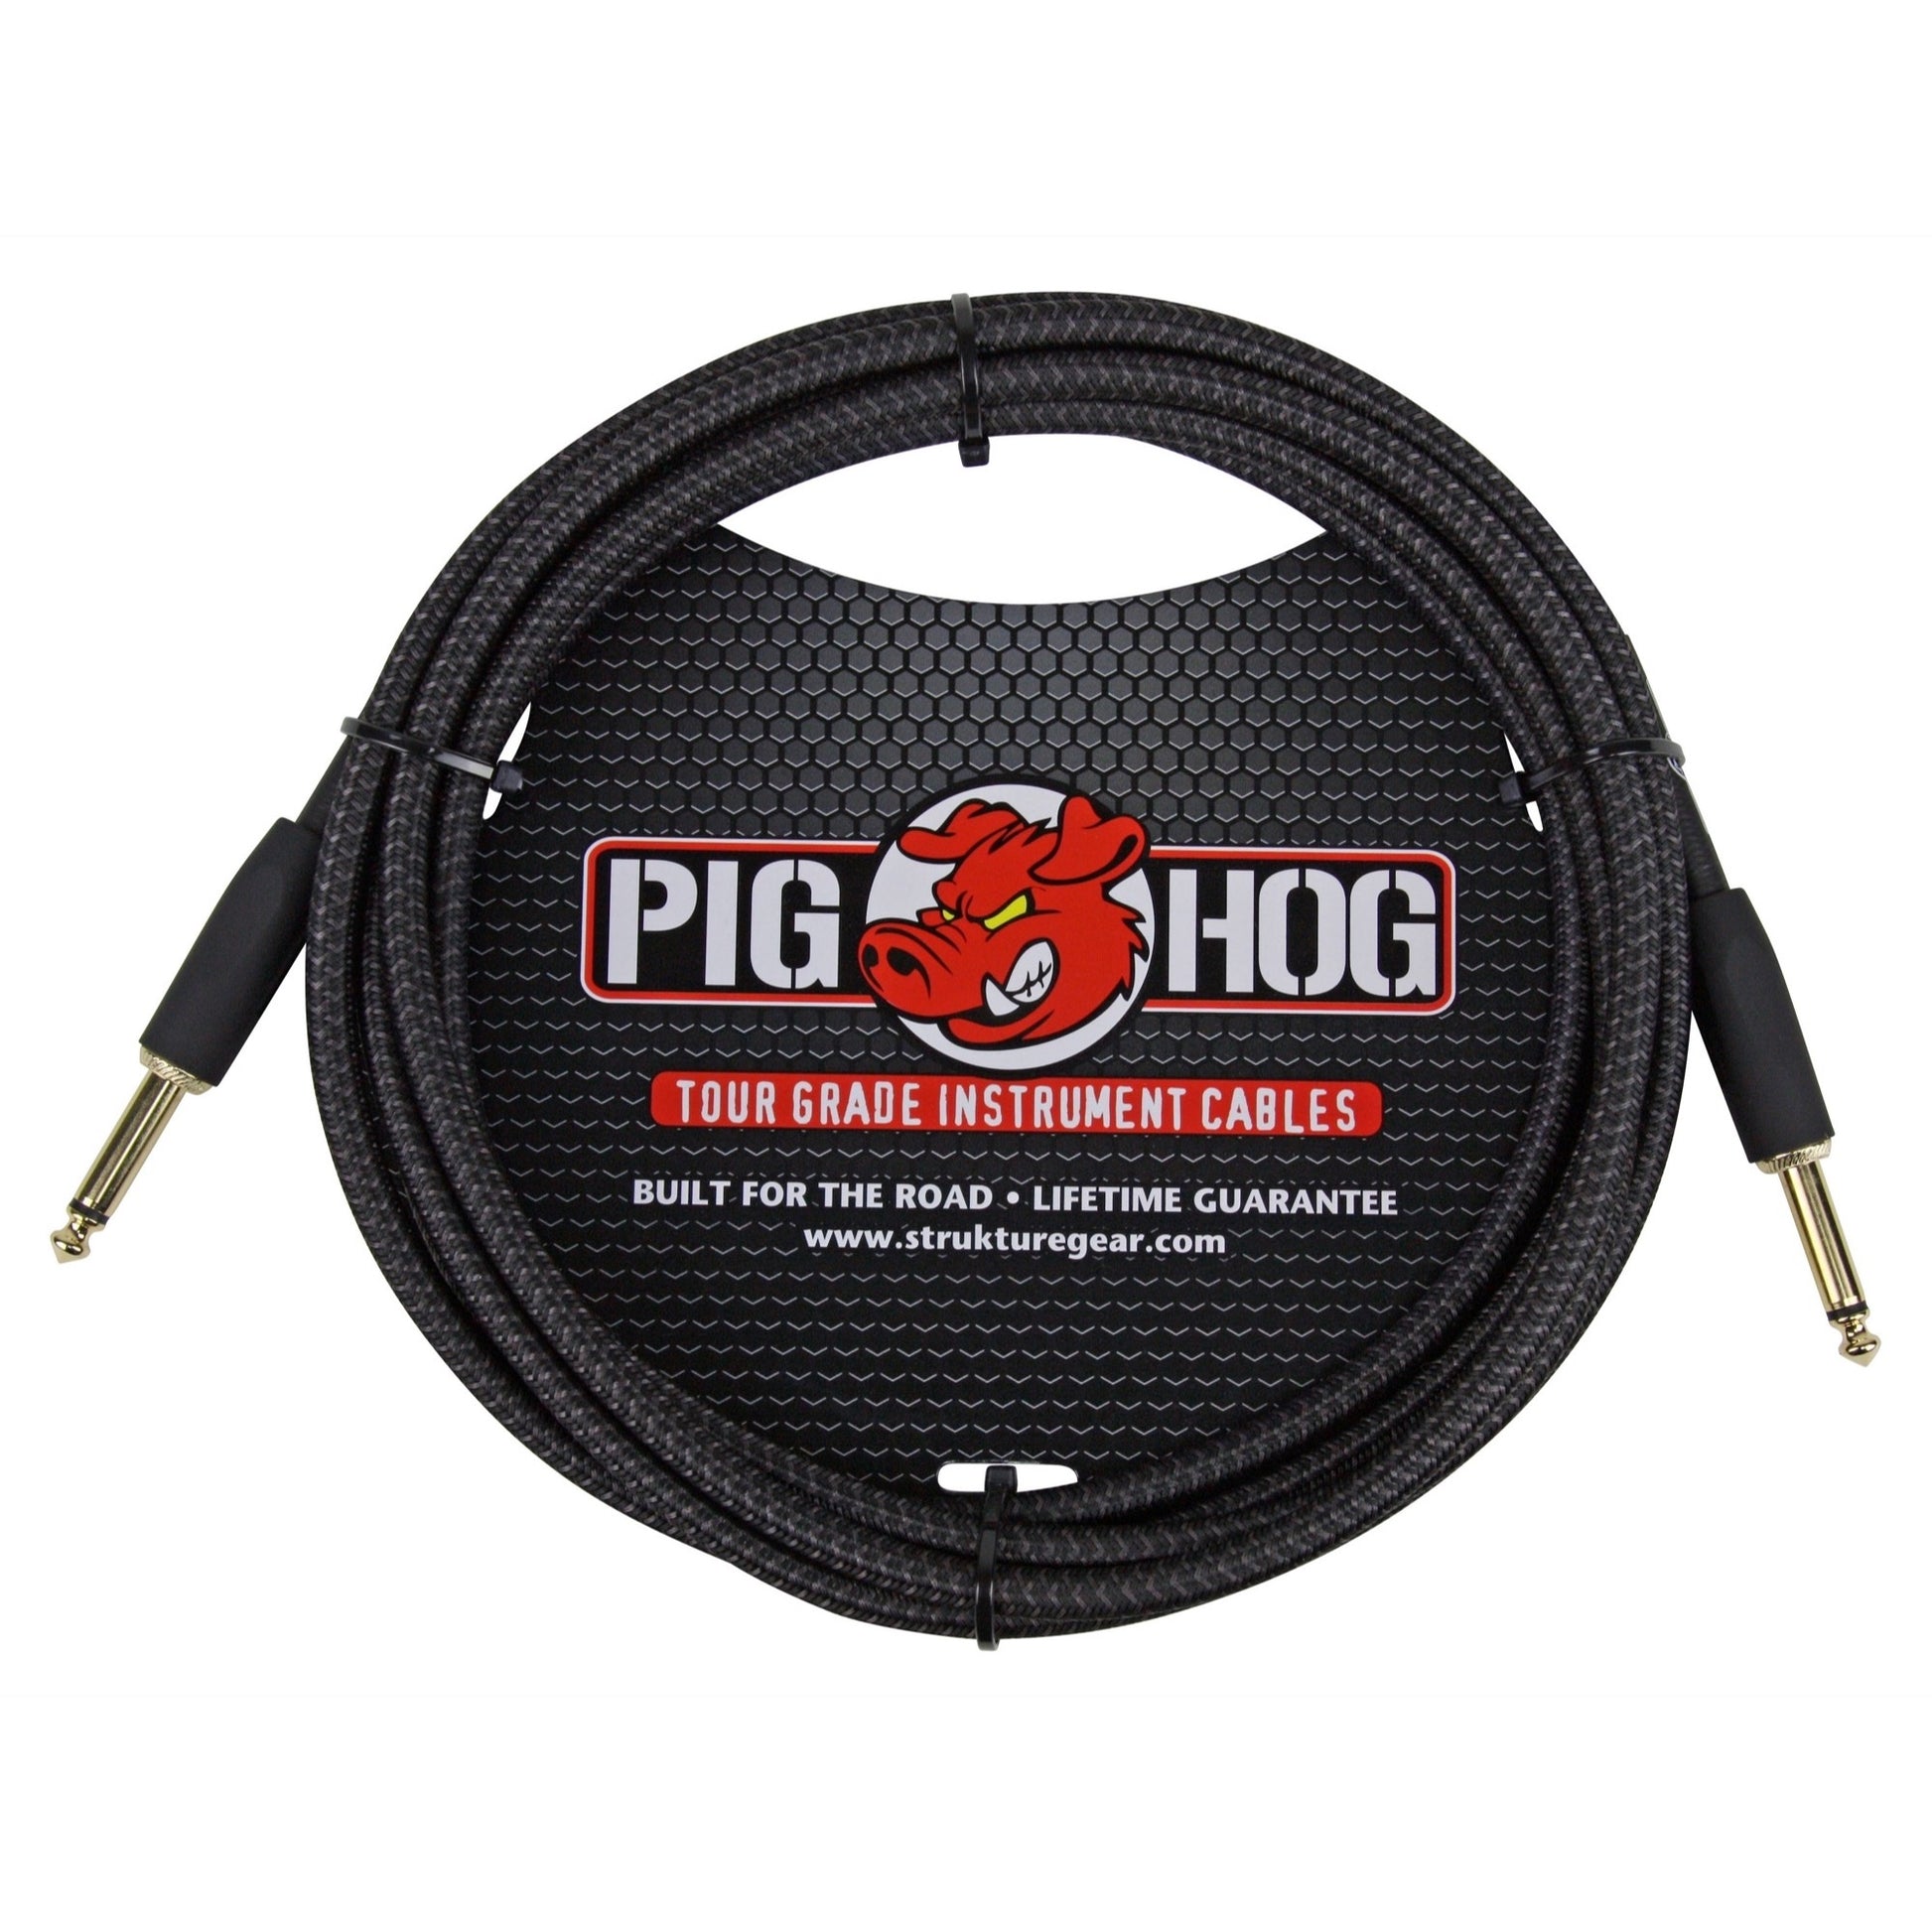 Pig Hog Vintage Series Instrument Cable, 1/4 Inch Straight to 1/4 Inch Straight, Black, 10 Foot